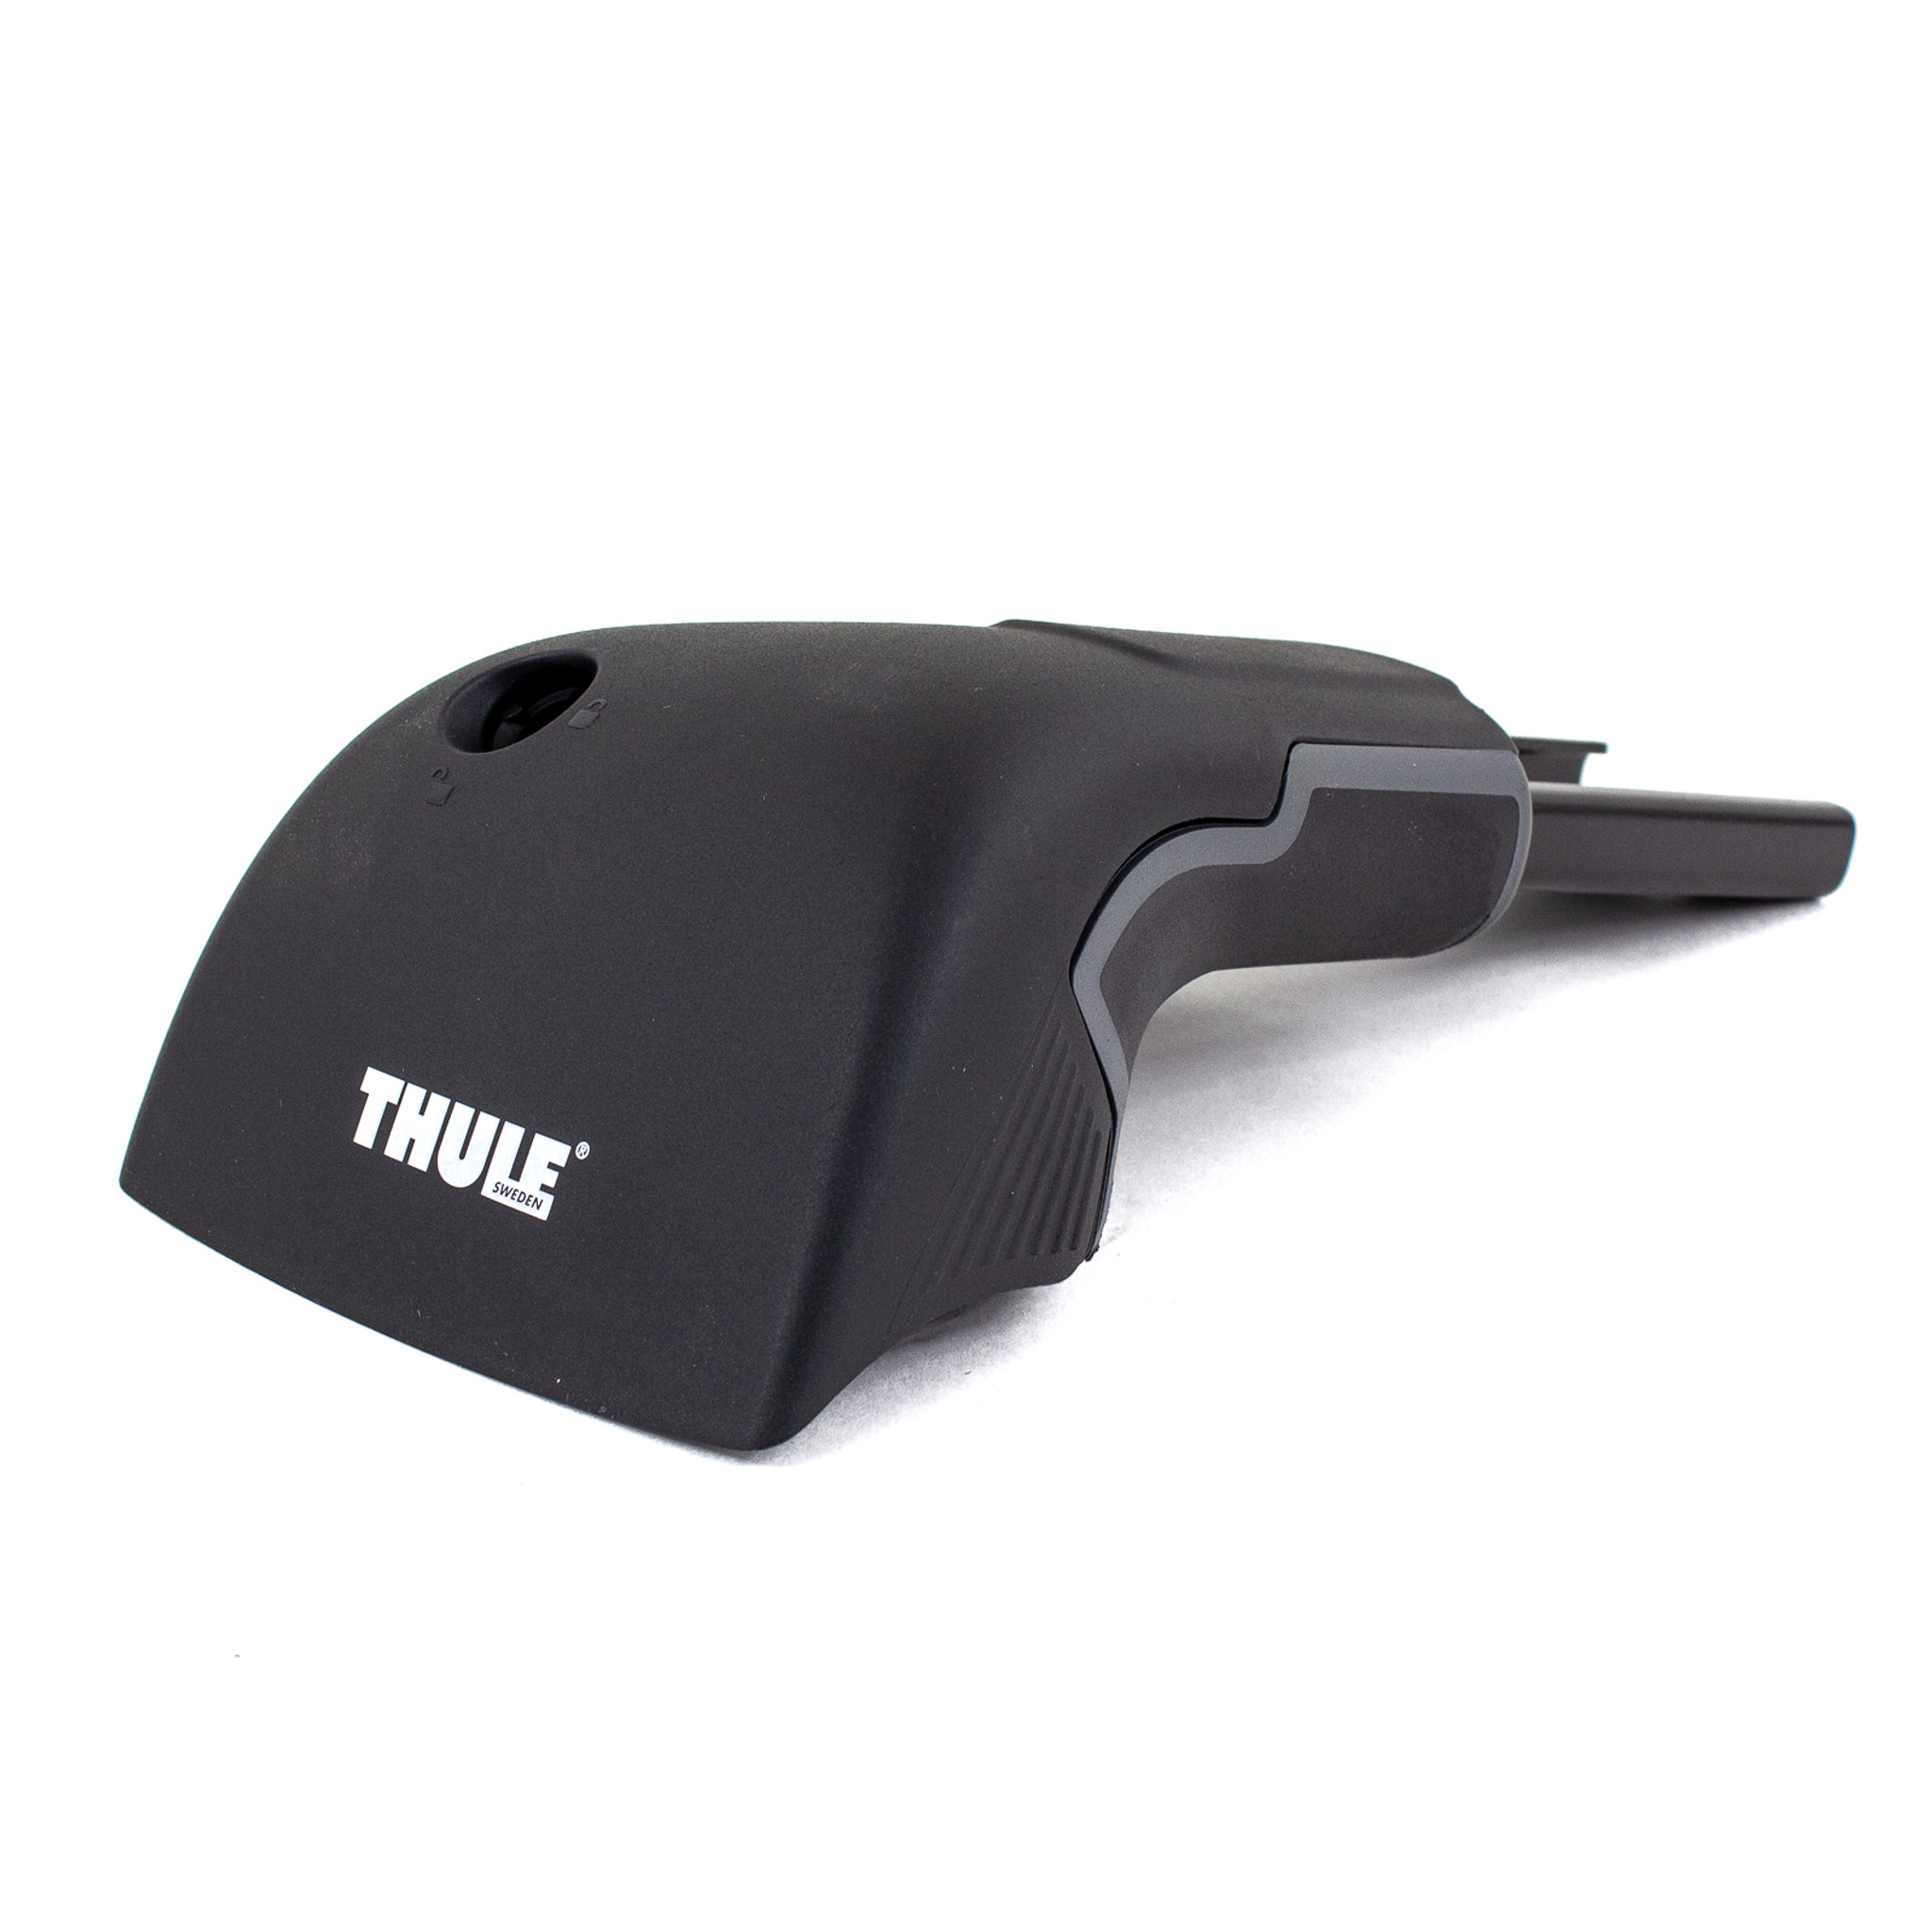 Thule Replacement Right Foot for the AeroBlade Edge 1500052332 